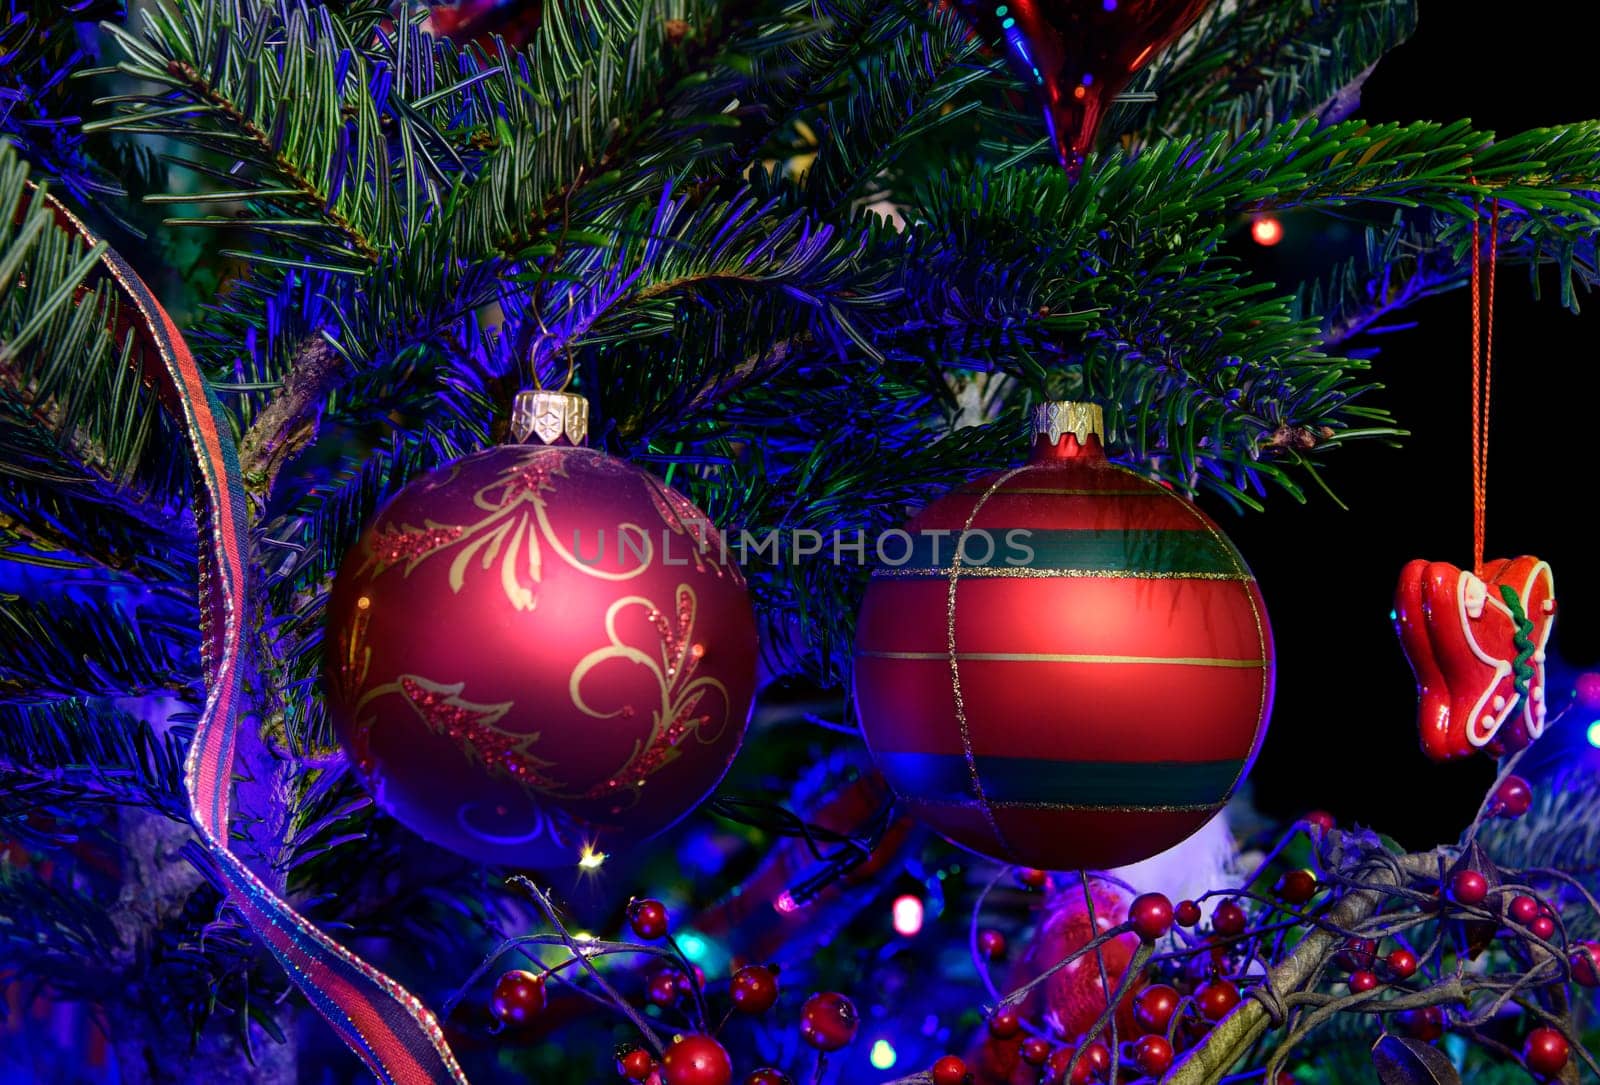 Closeup of Festive holiday decorations hanging from an illuminated Christmas tree.